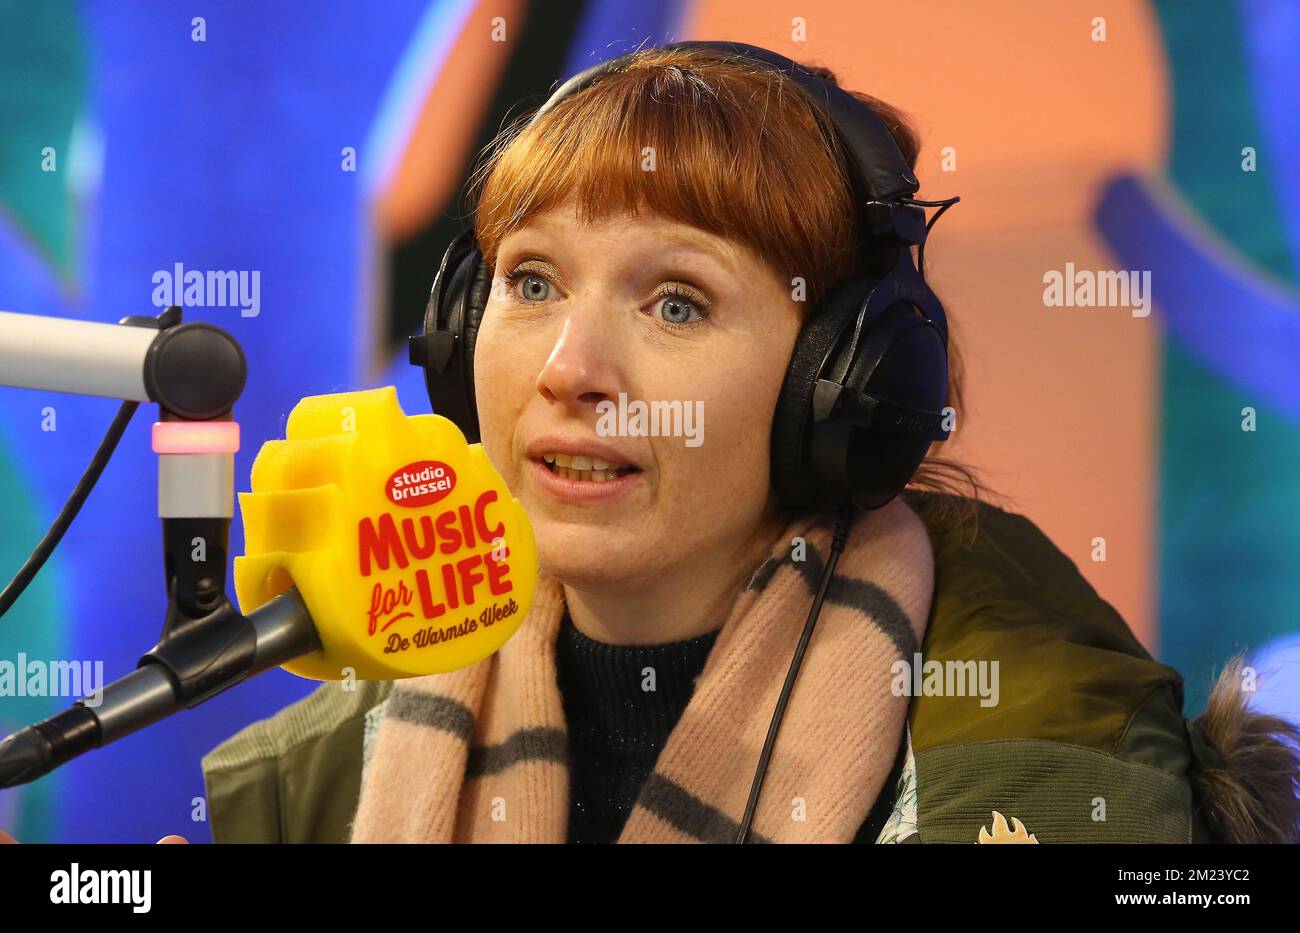 Animator Linde Merckpoel pictured at the start of the 2016 edition (the  11th edition) of the Music For Life campaign 'De Warmste Week', organized  by Flemish VRT radio station Studio Brussels, Sunday